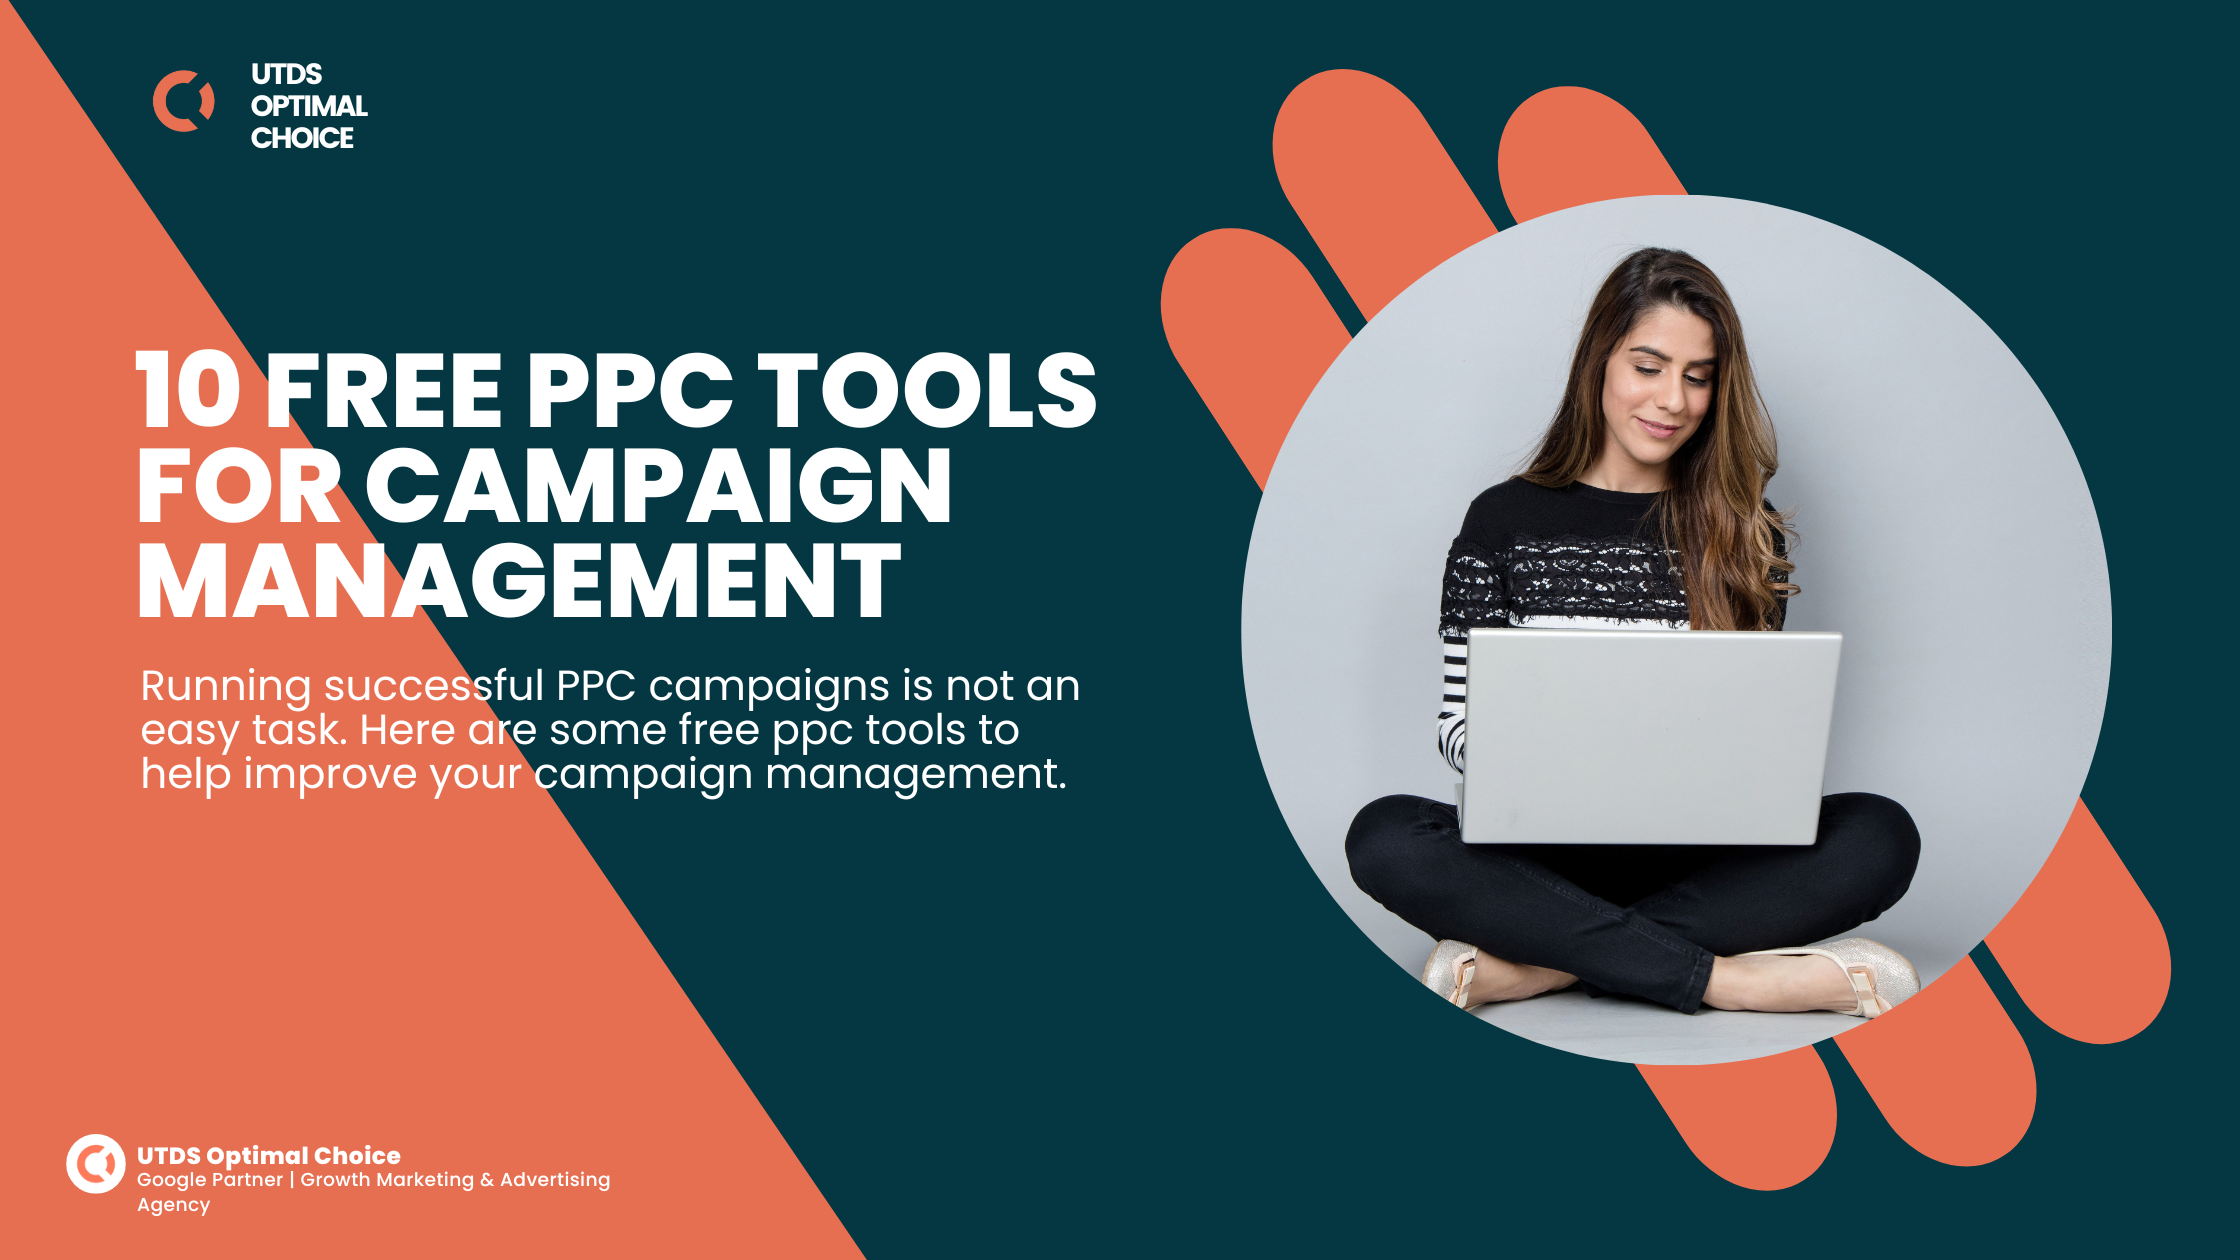 10 Free PPC Tools for Campaign Management